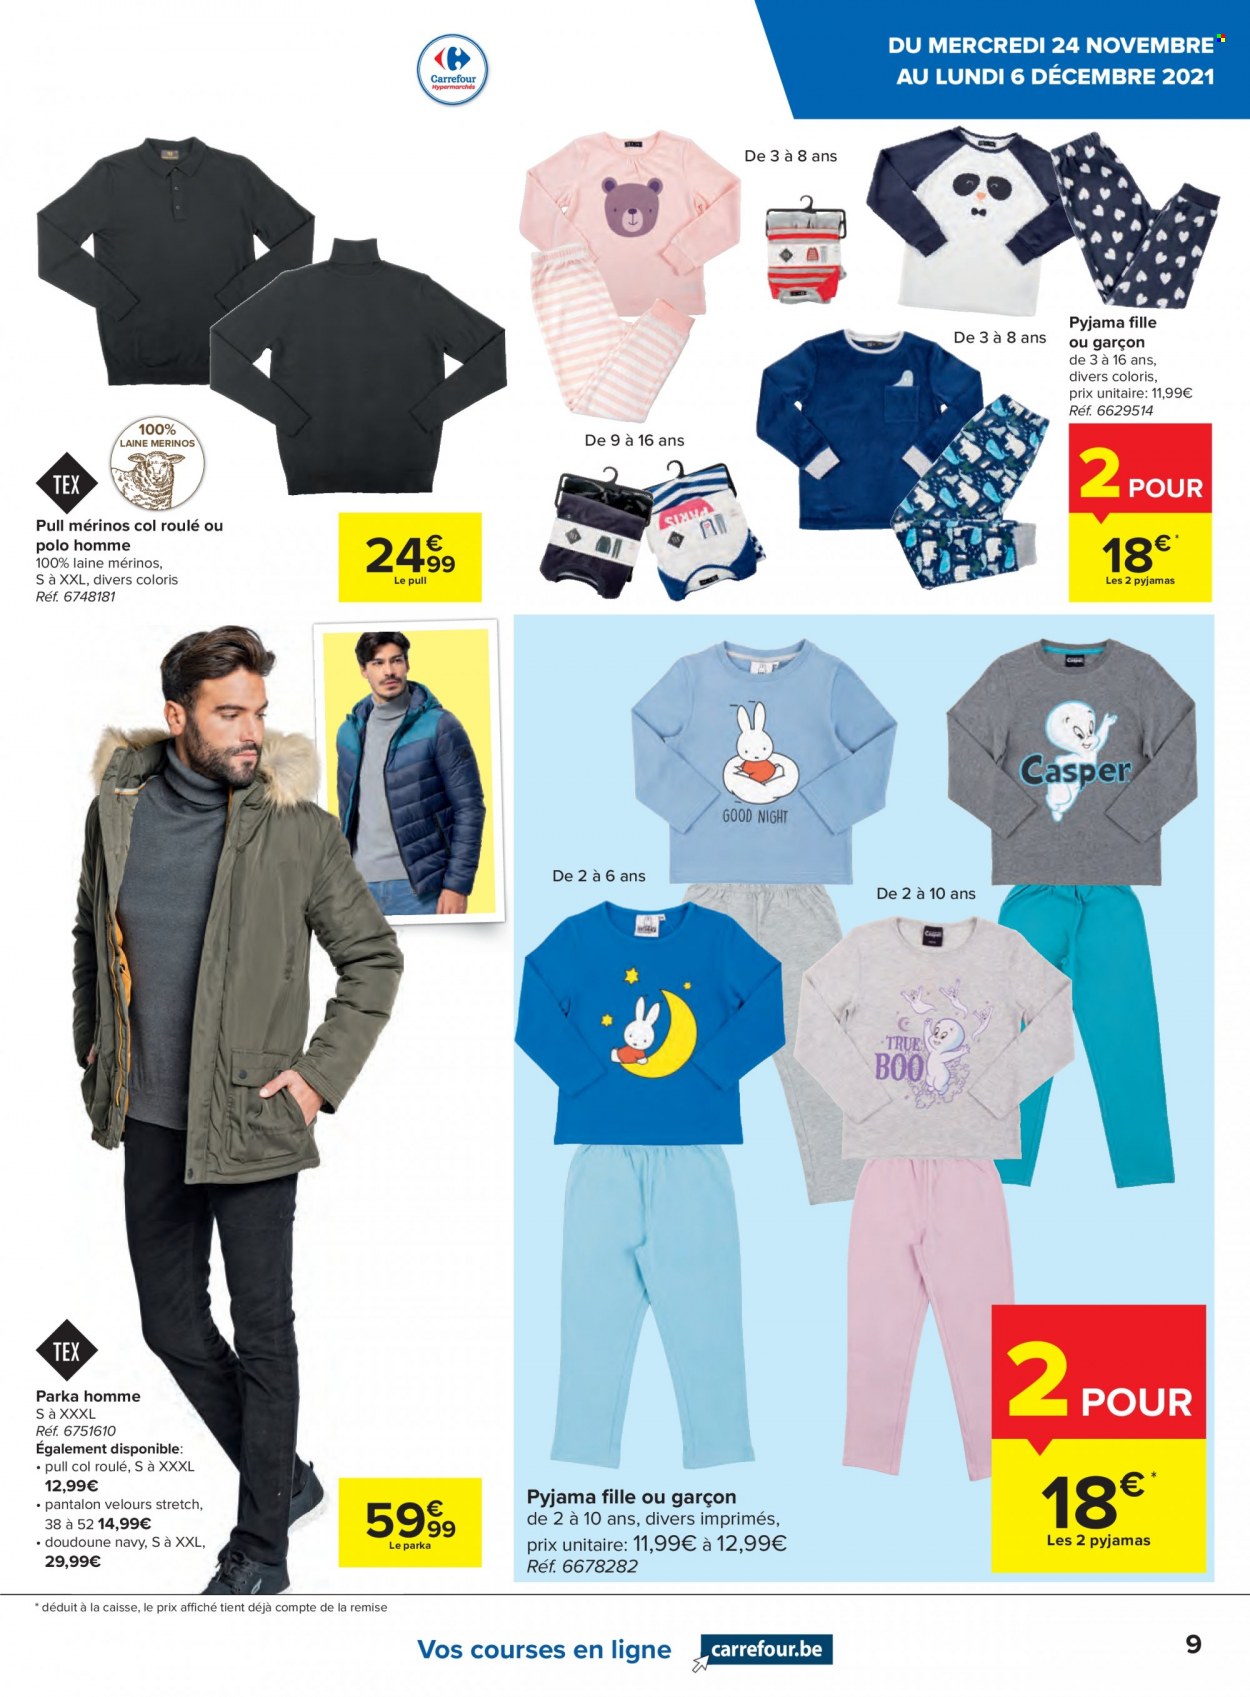 Catalogue Carrefour hypermarkt - 24.11.2021 - 6.12.2021. Page 9.